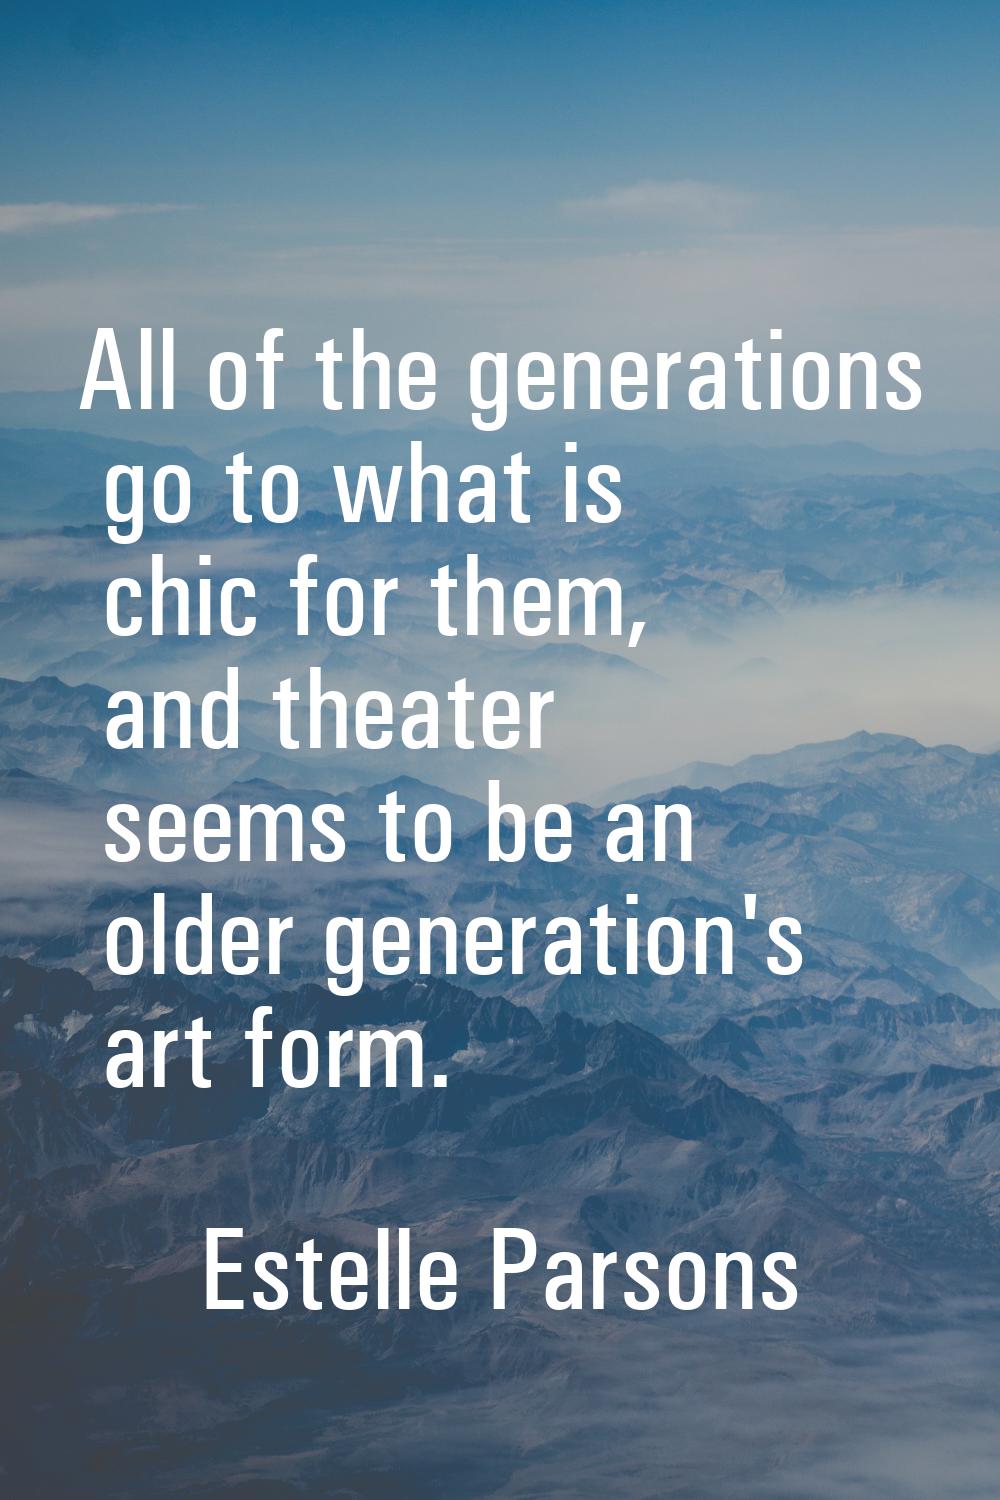 All of the generations go to what is chic for them, and theater seems to be an older generation's a